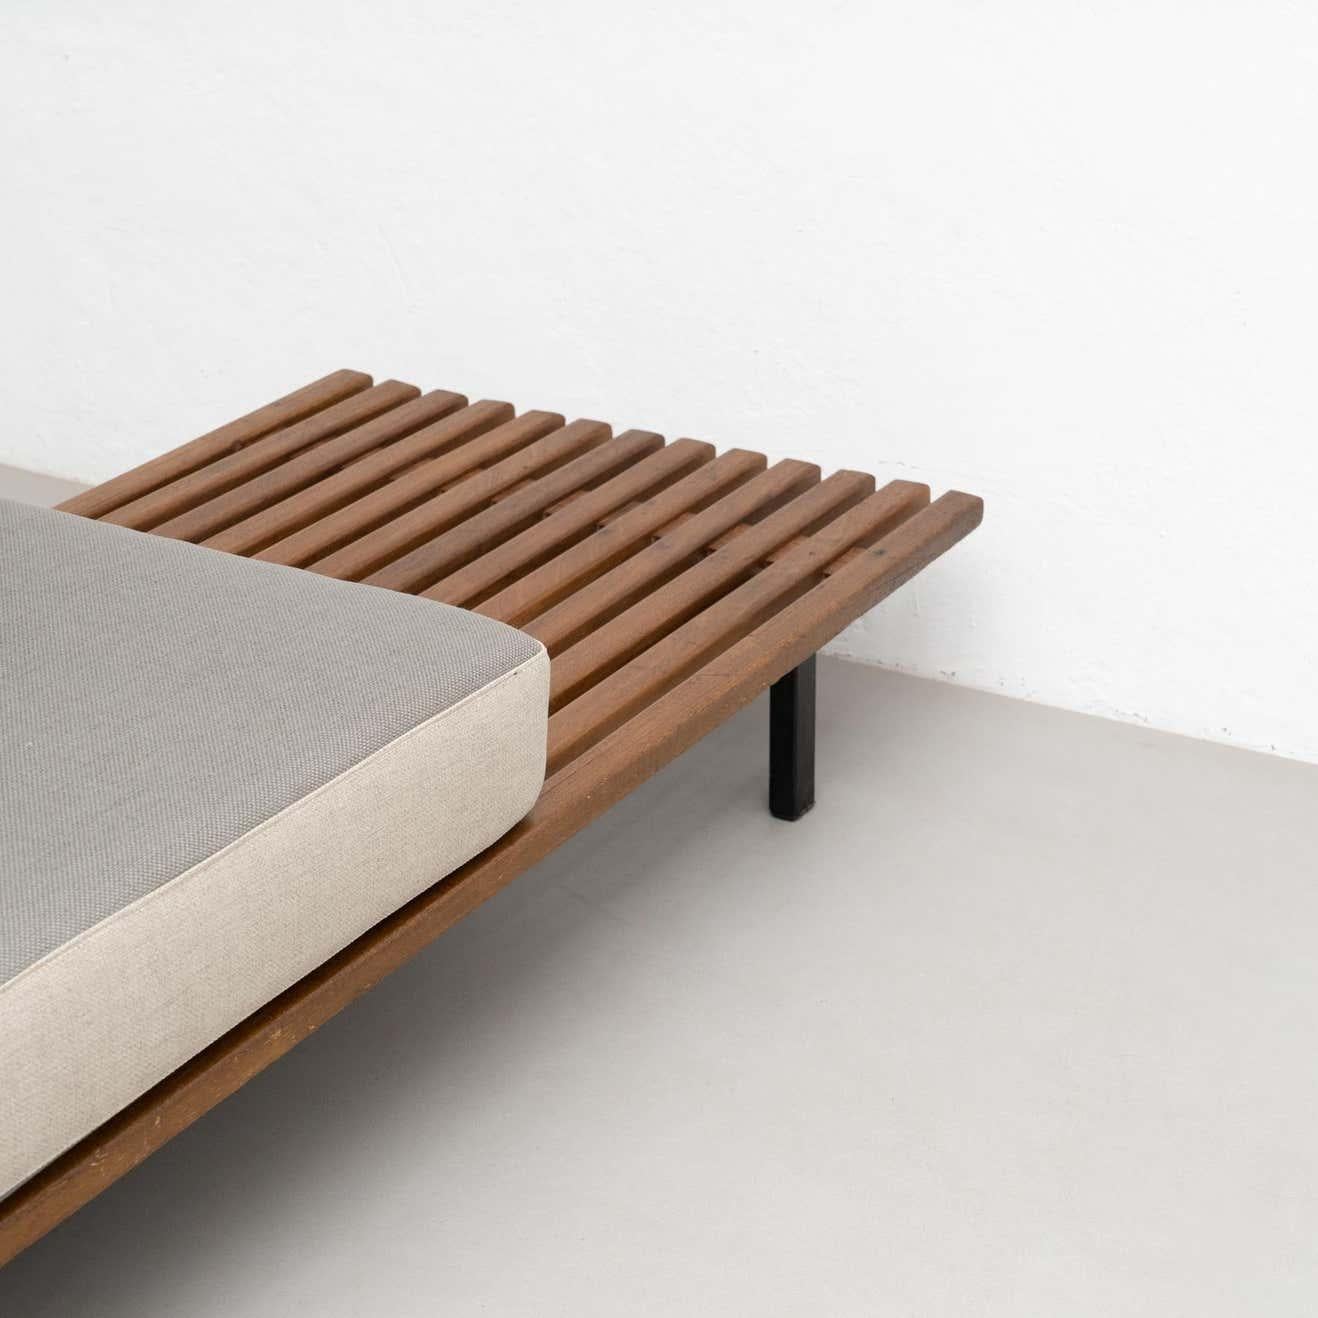 Charlotte Perriand Cansado Bench with a Drawer, circa 1958 For Sale 12